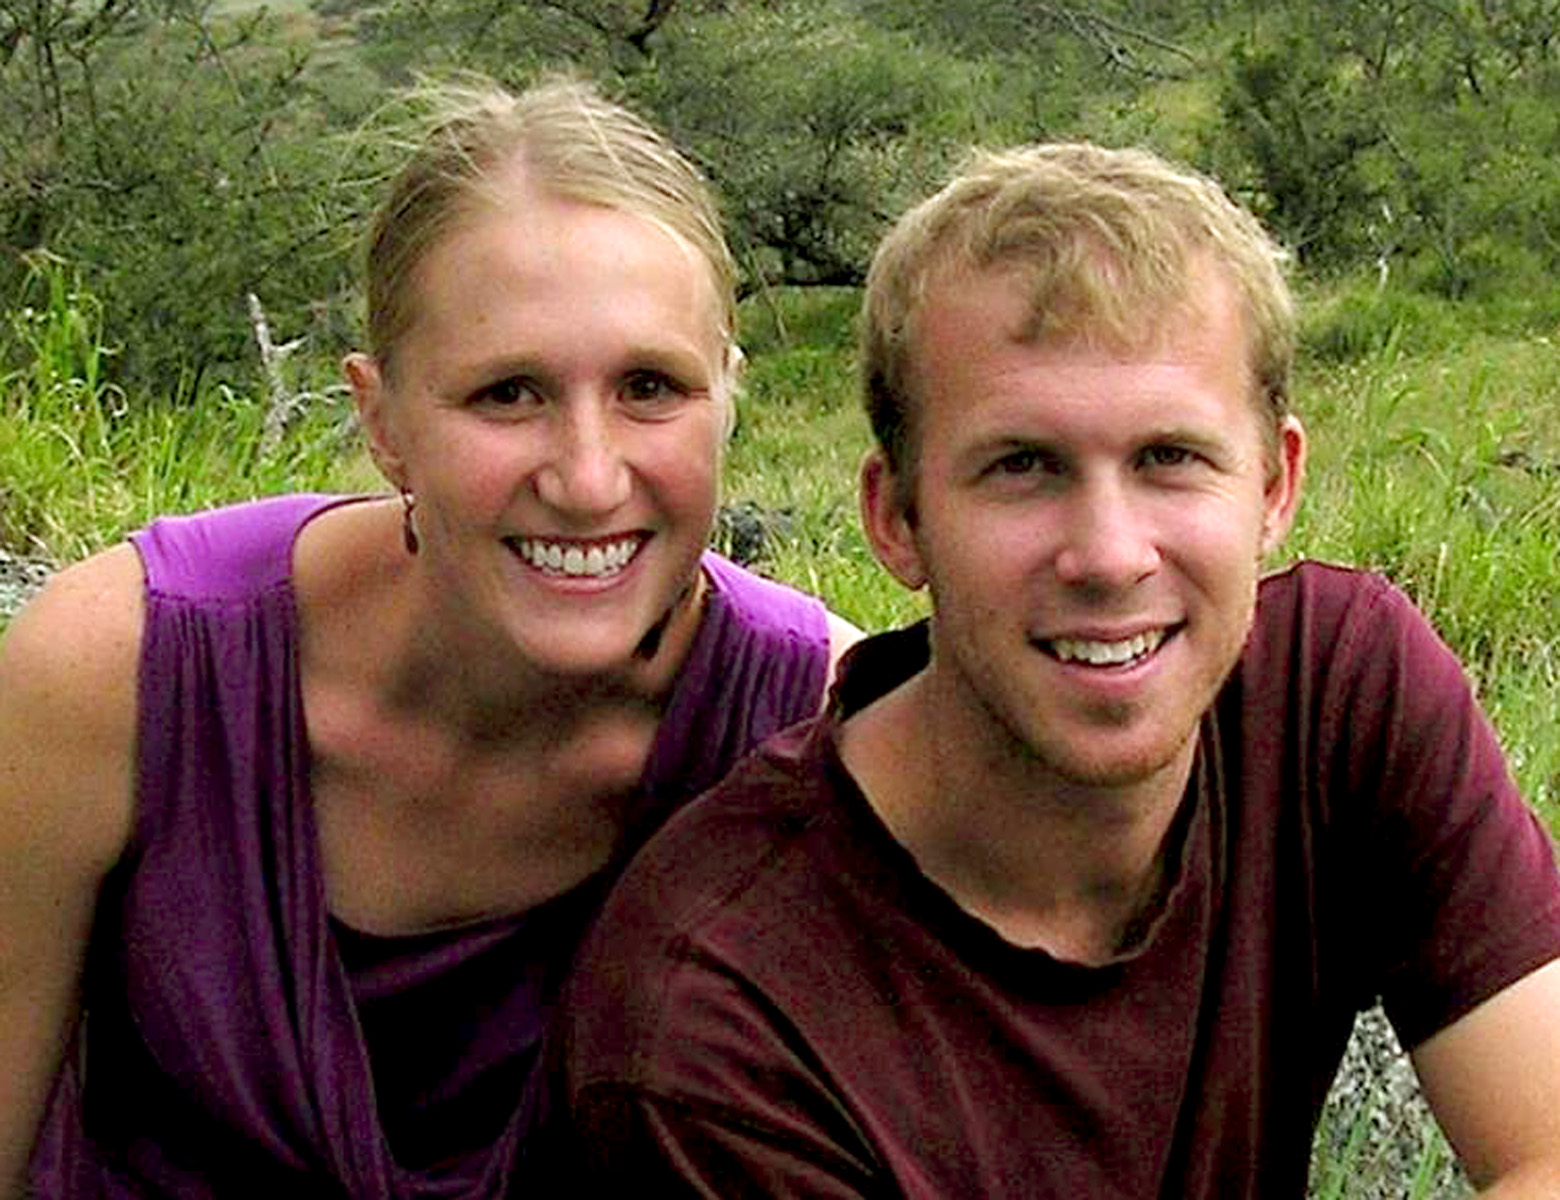 Laura and Andrew Rescorla, missionaries serving at Reach Beyond as environmental and civil engineers, are based in Accra, Ghana. Laura formerly worked as an intern in Ecuador in 2009.